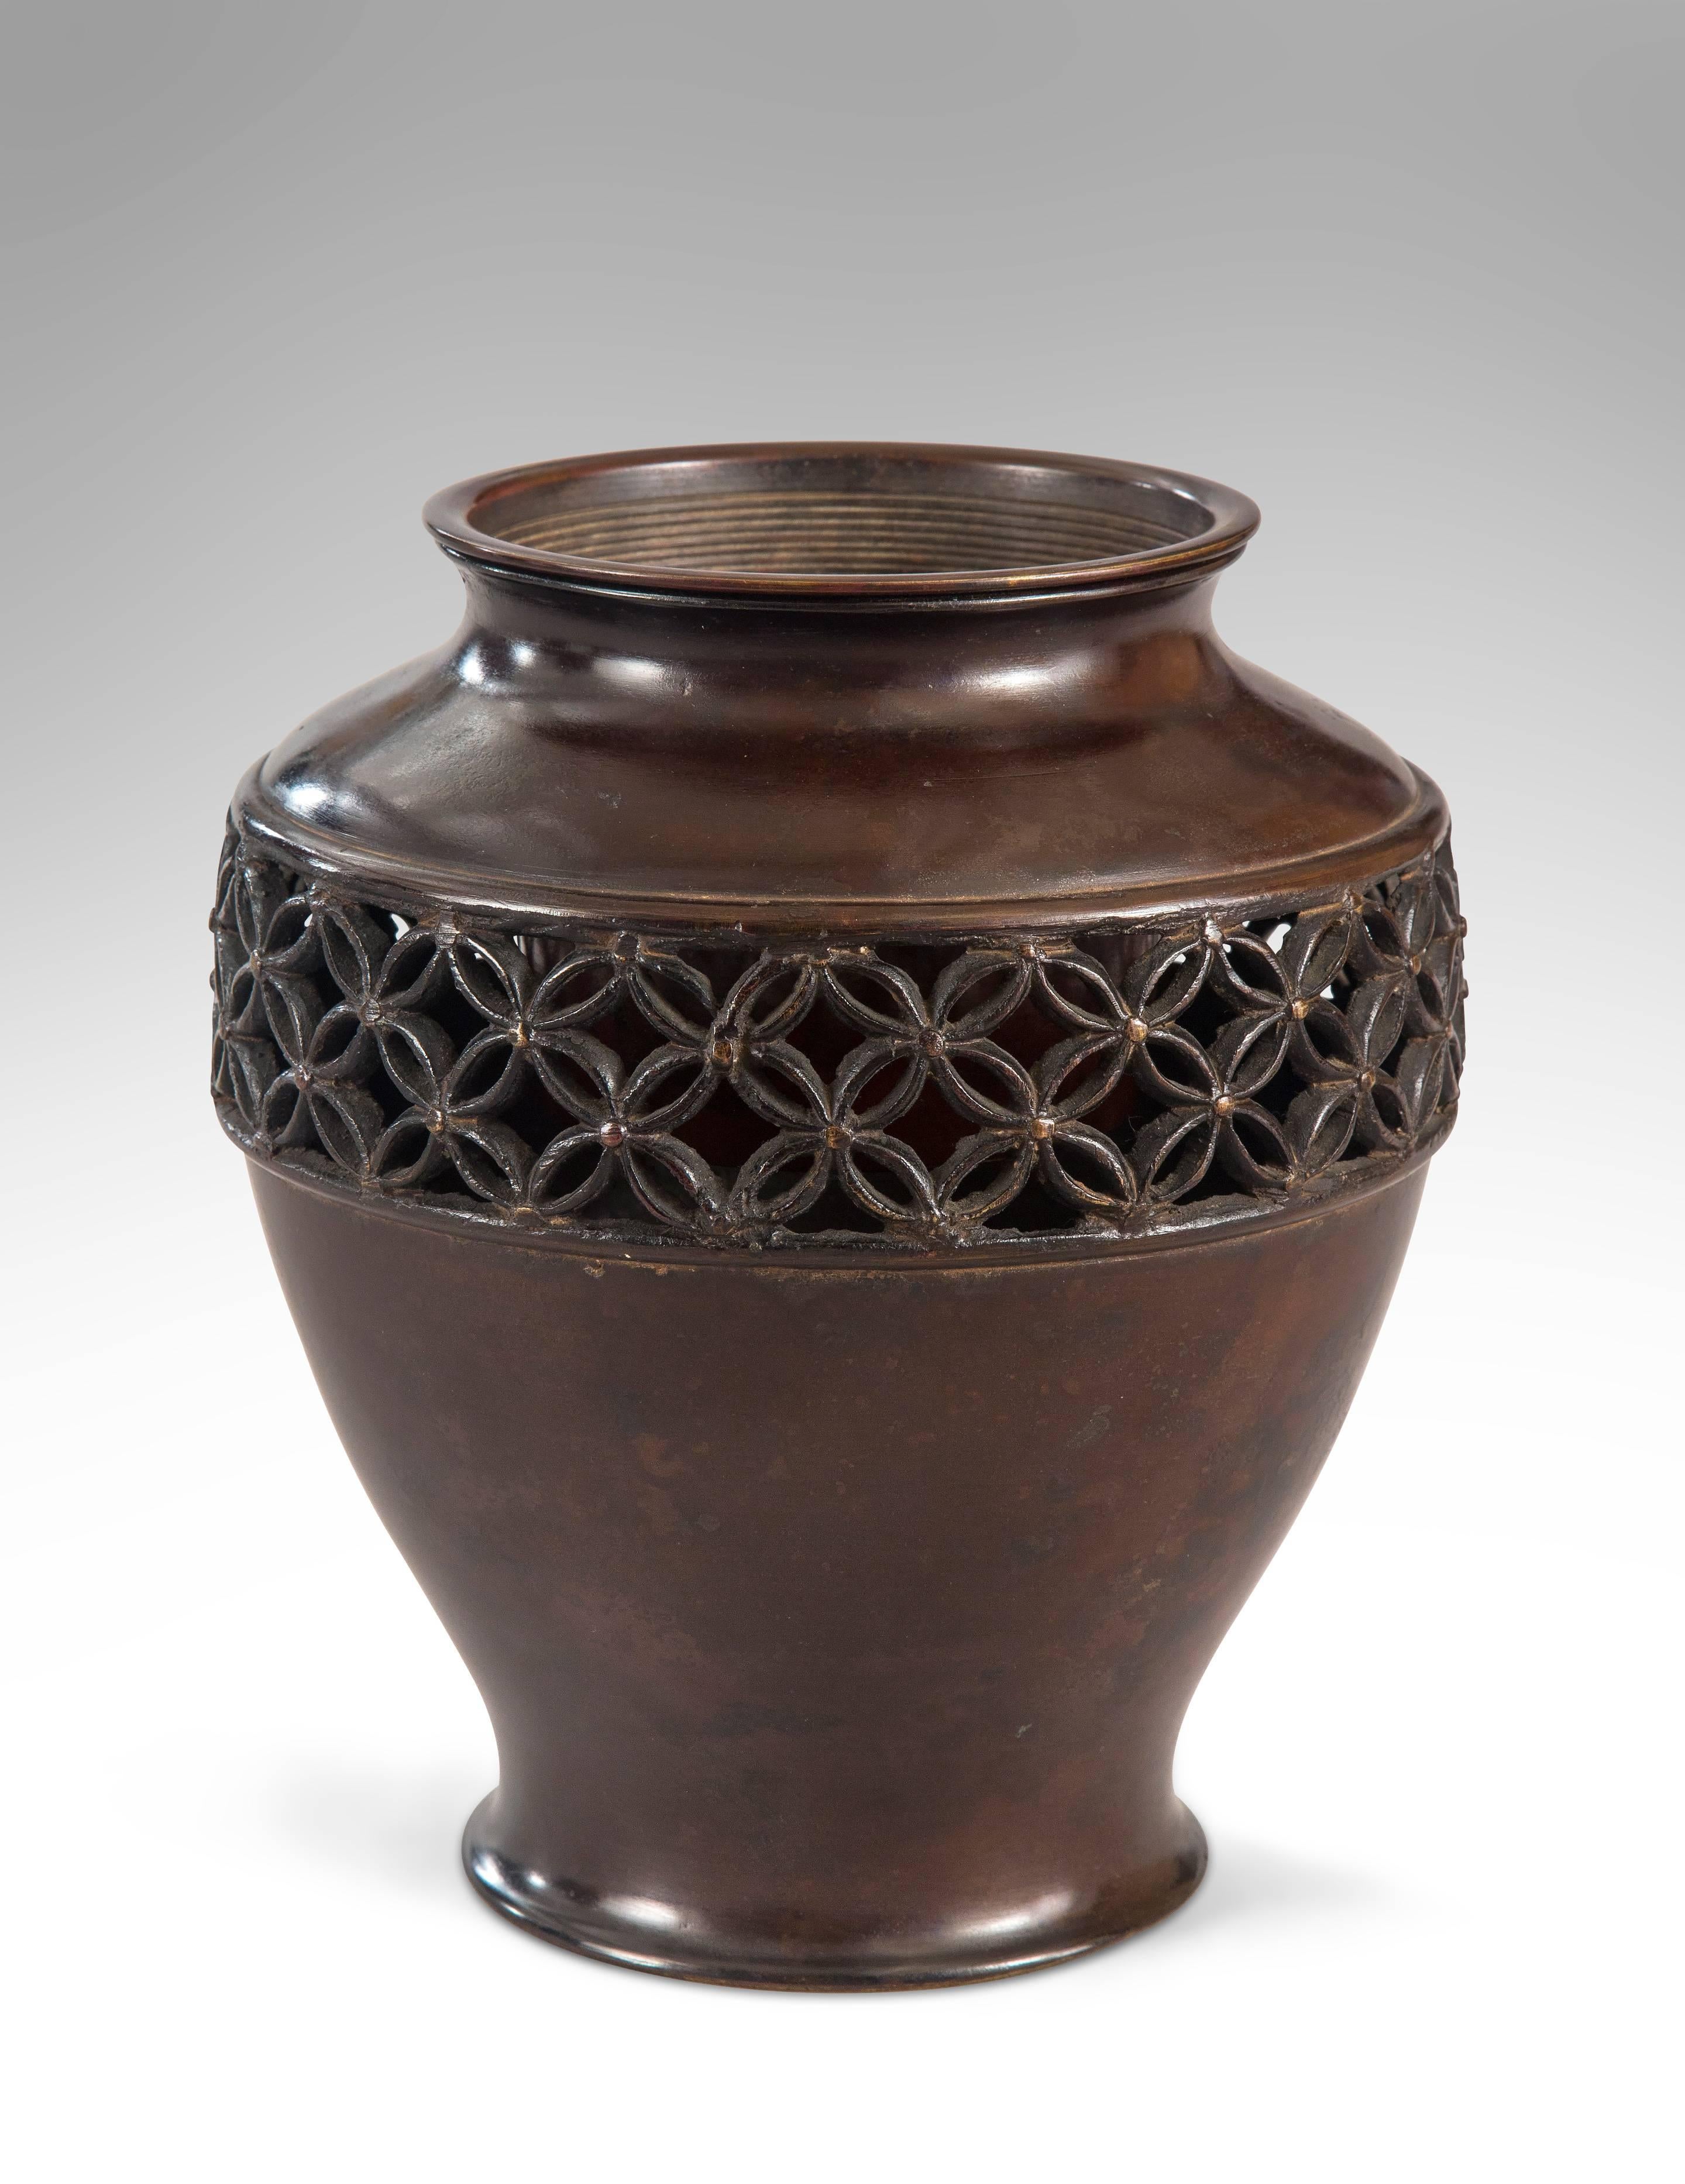 Beautifully patinated and a fine cast of substantial weight. Banded with an openwork frieze and a liner. A very good Japanese bronze vase.